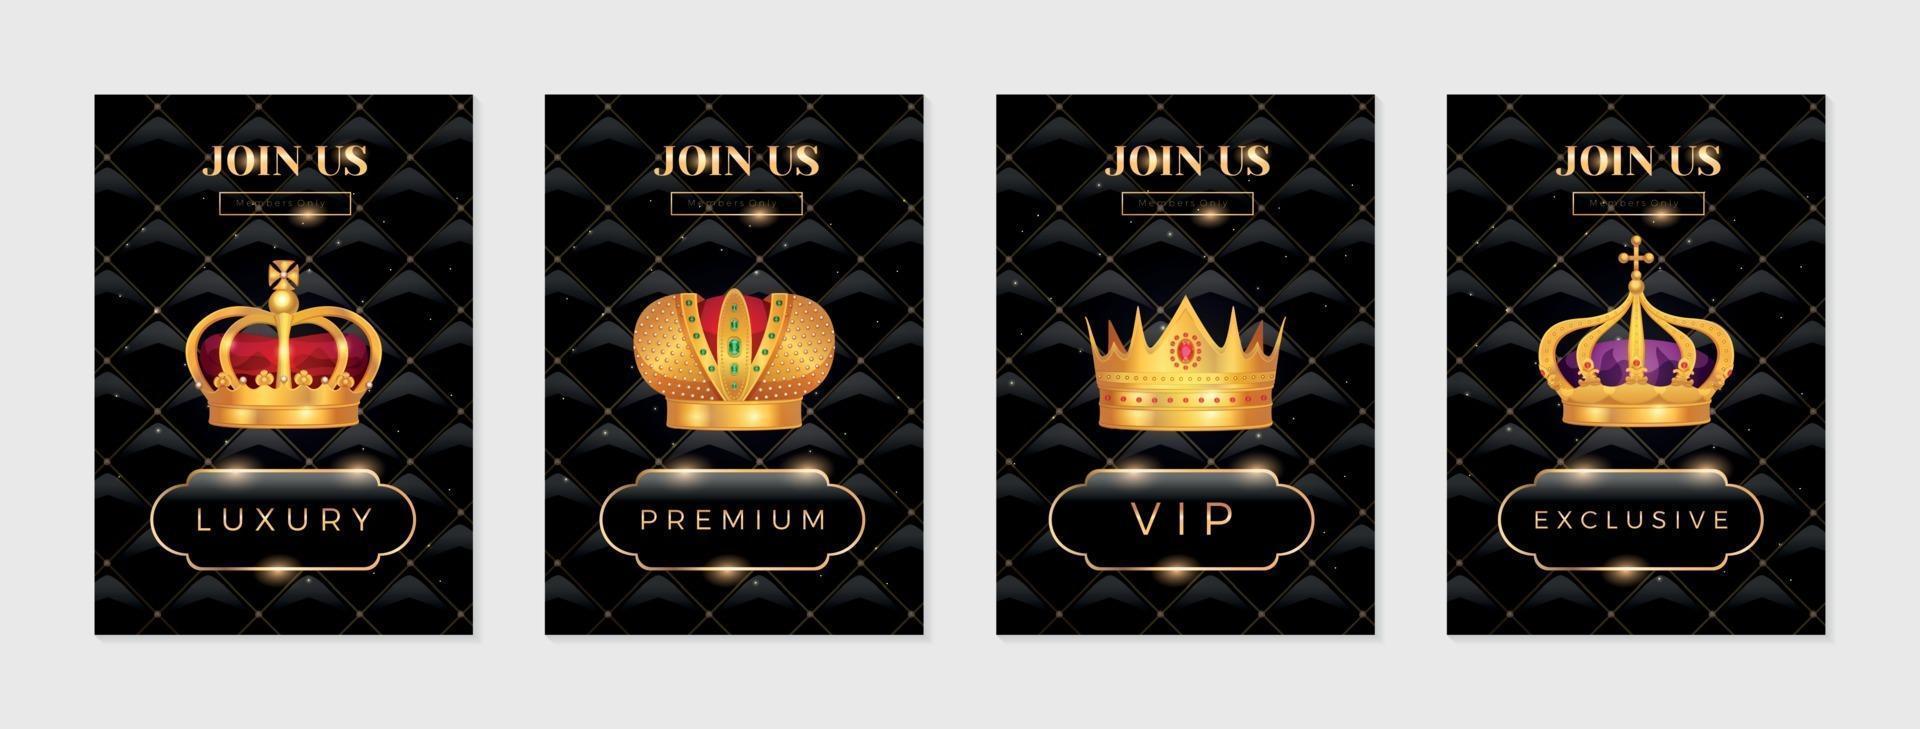 Gold Crown Posters Set vector